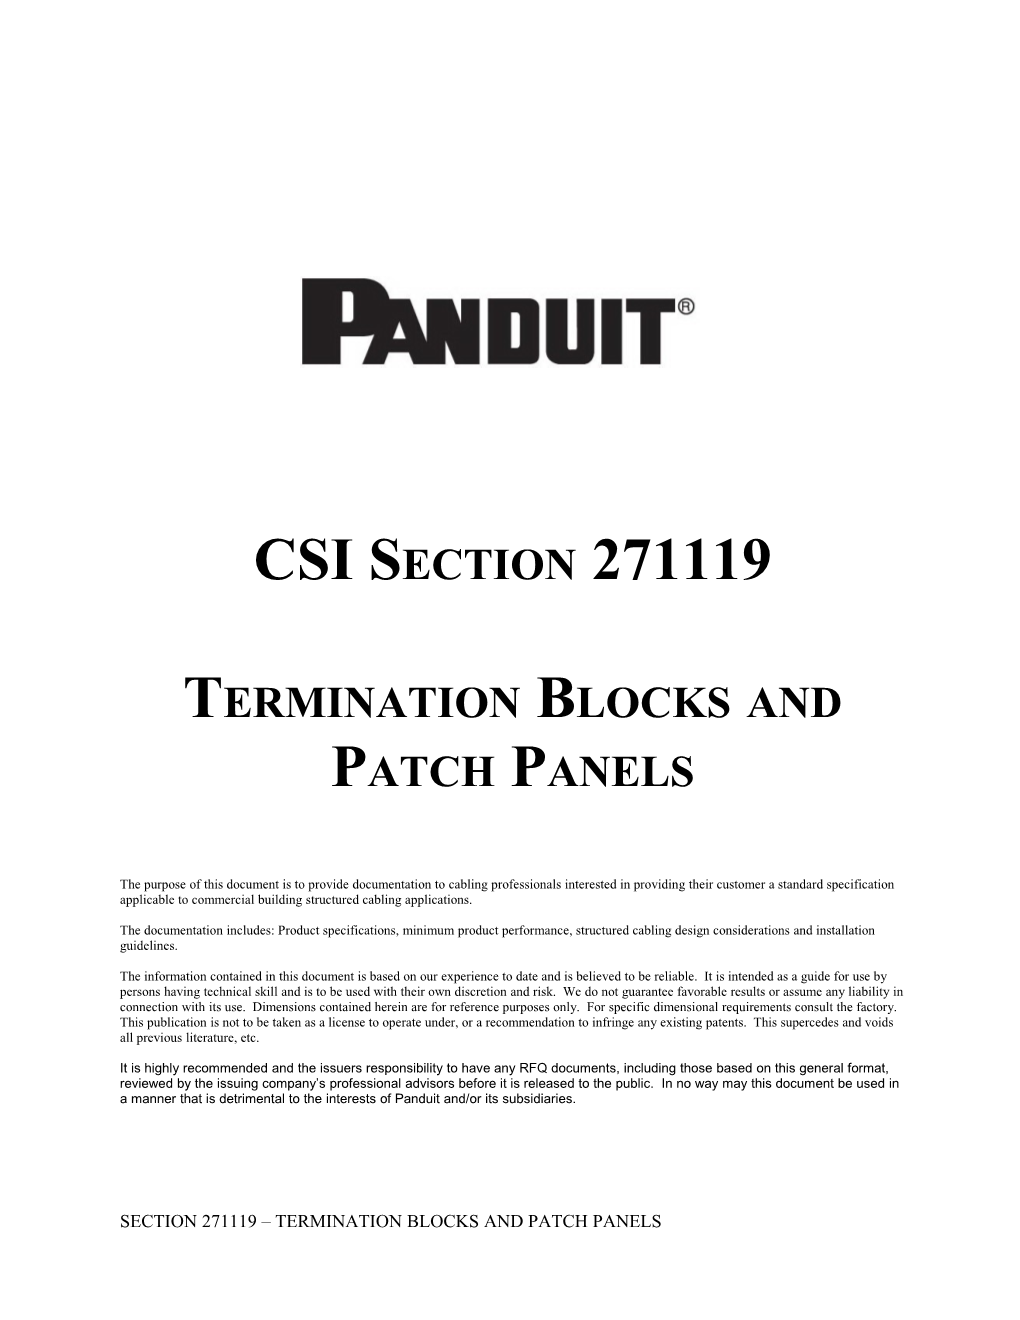 Boilerplate Termination Blocks and Patch Panels Specification - 27 11 19